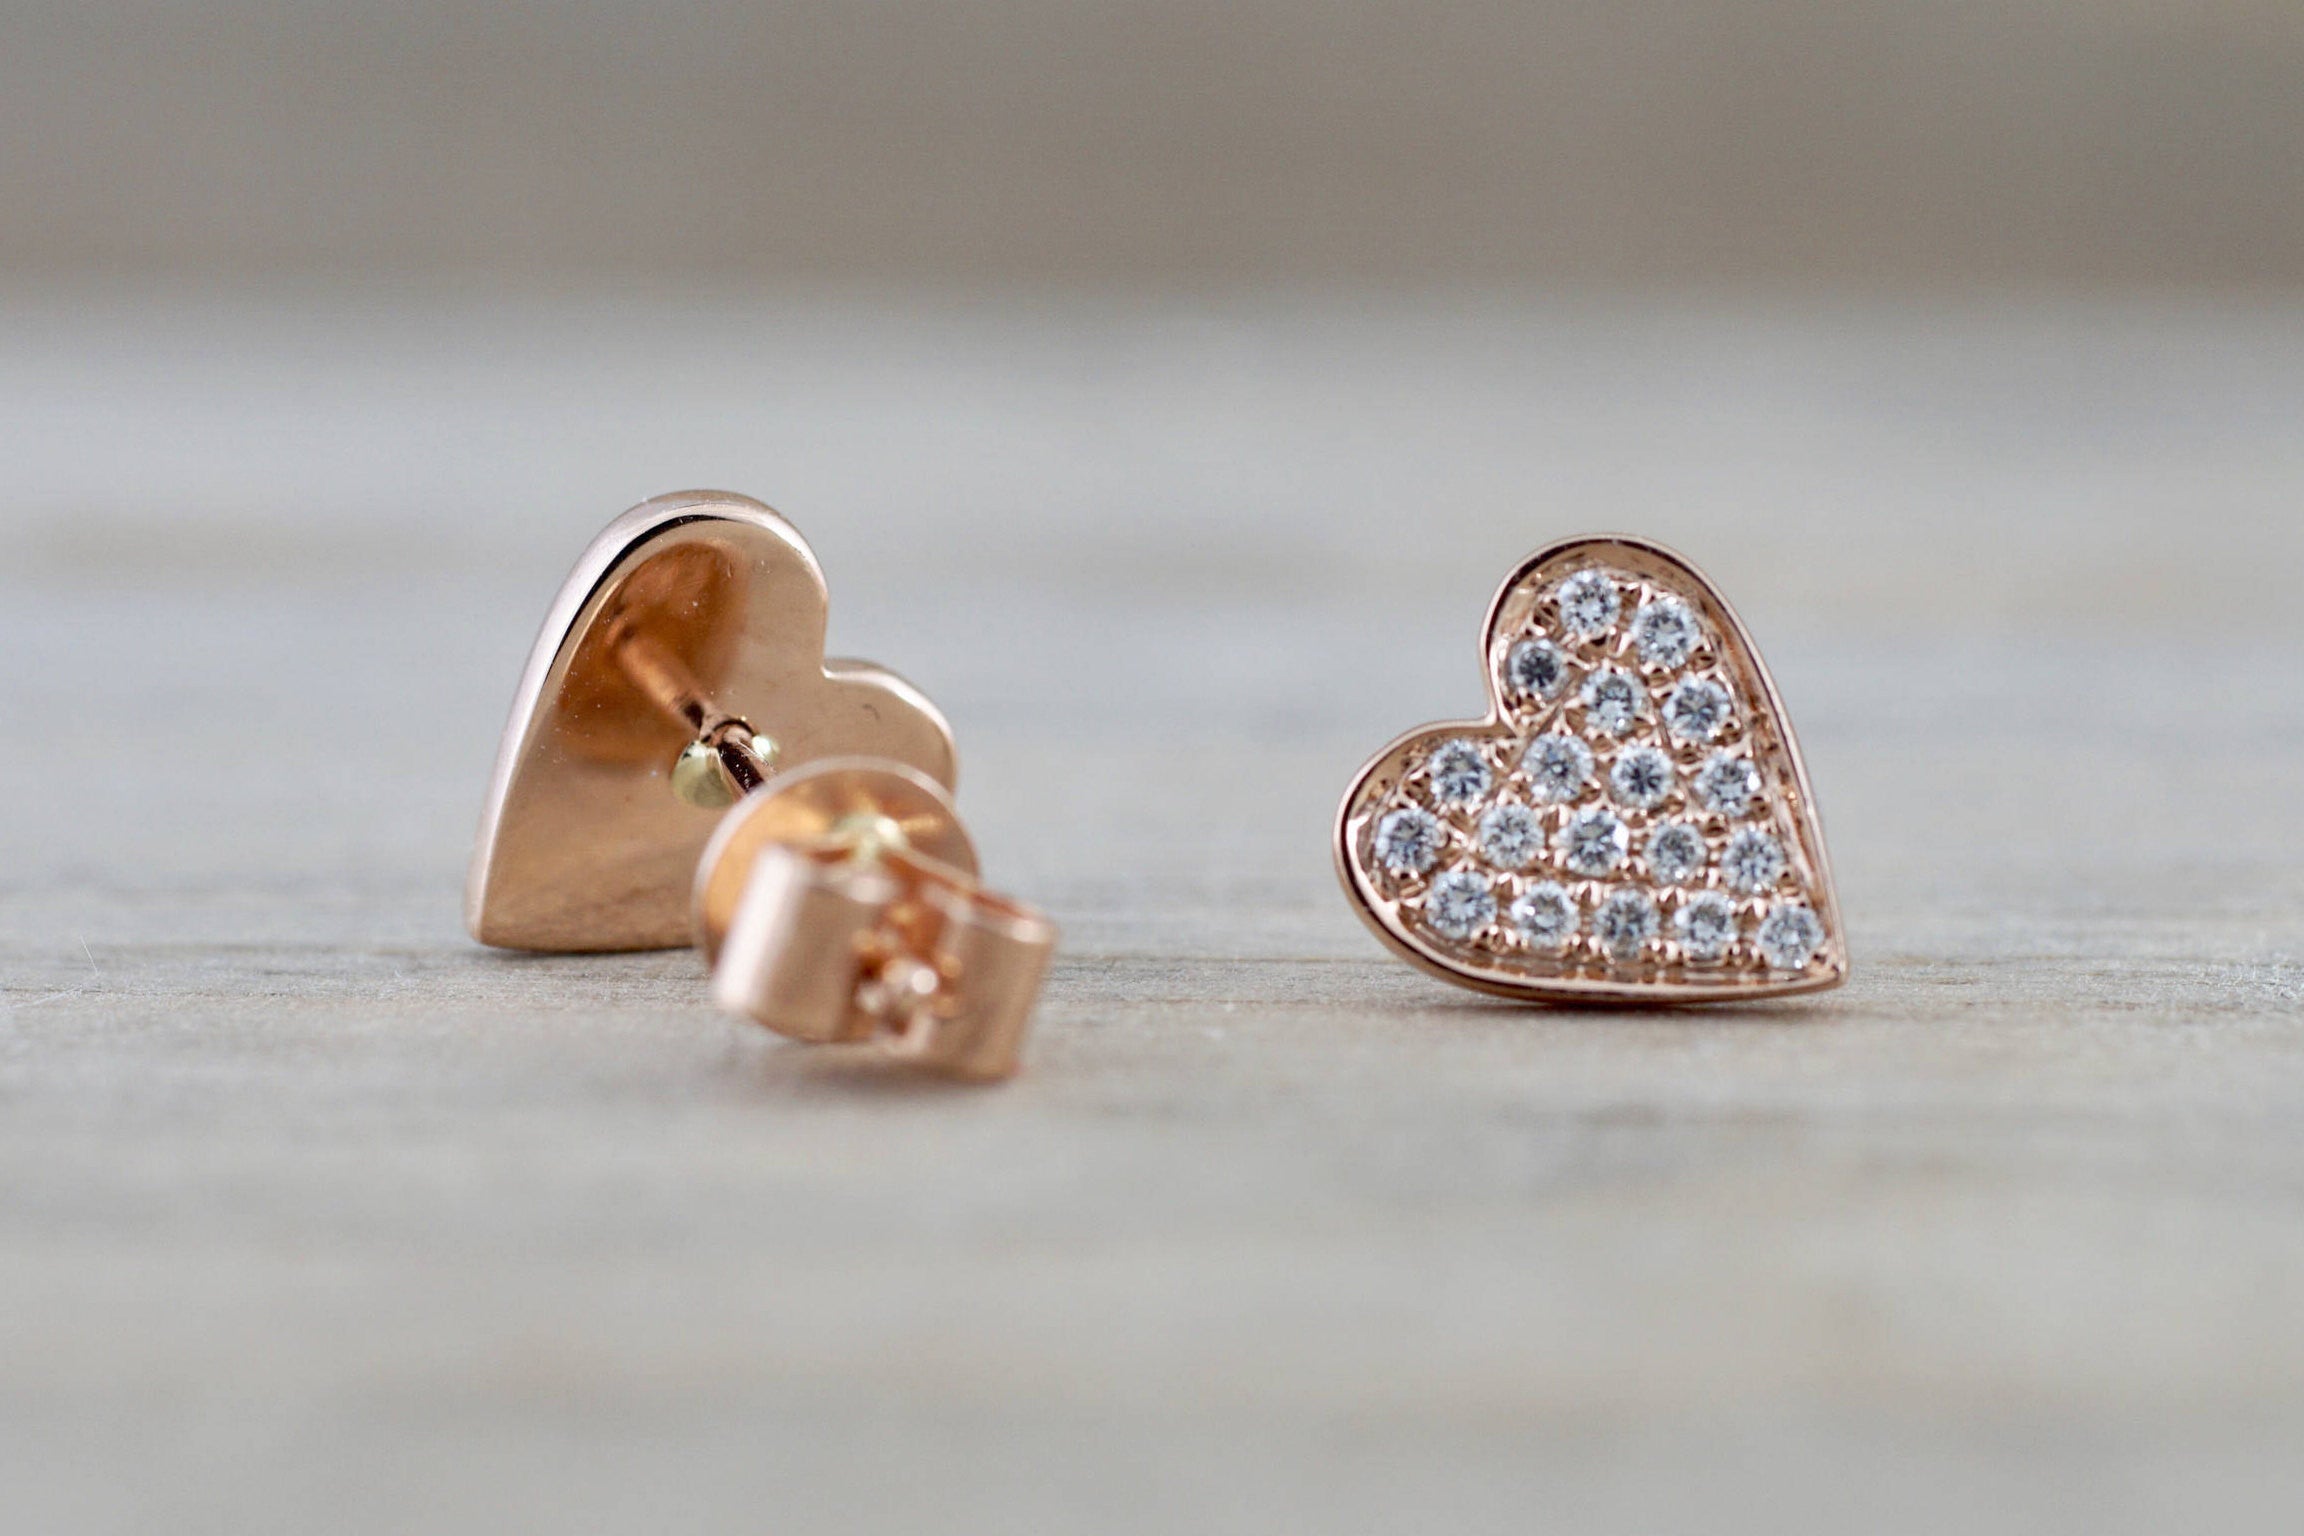 14k Rose Gold Disk Design Heart Diamond Earrings Stud Post Studs Round Micro Pave Flat - Brilliant Facets